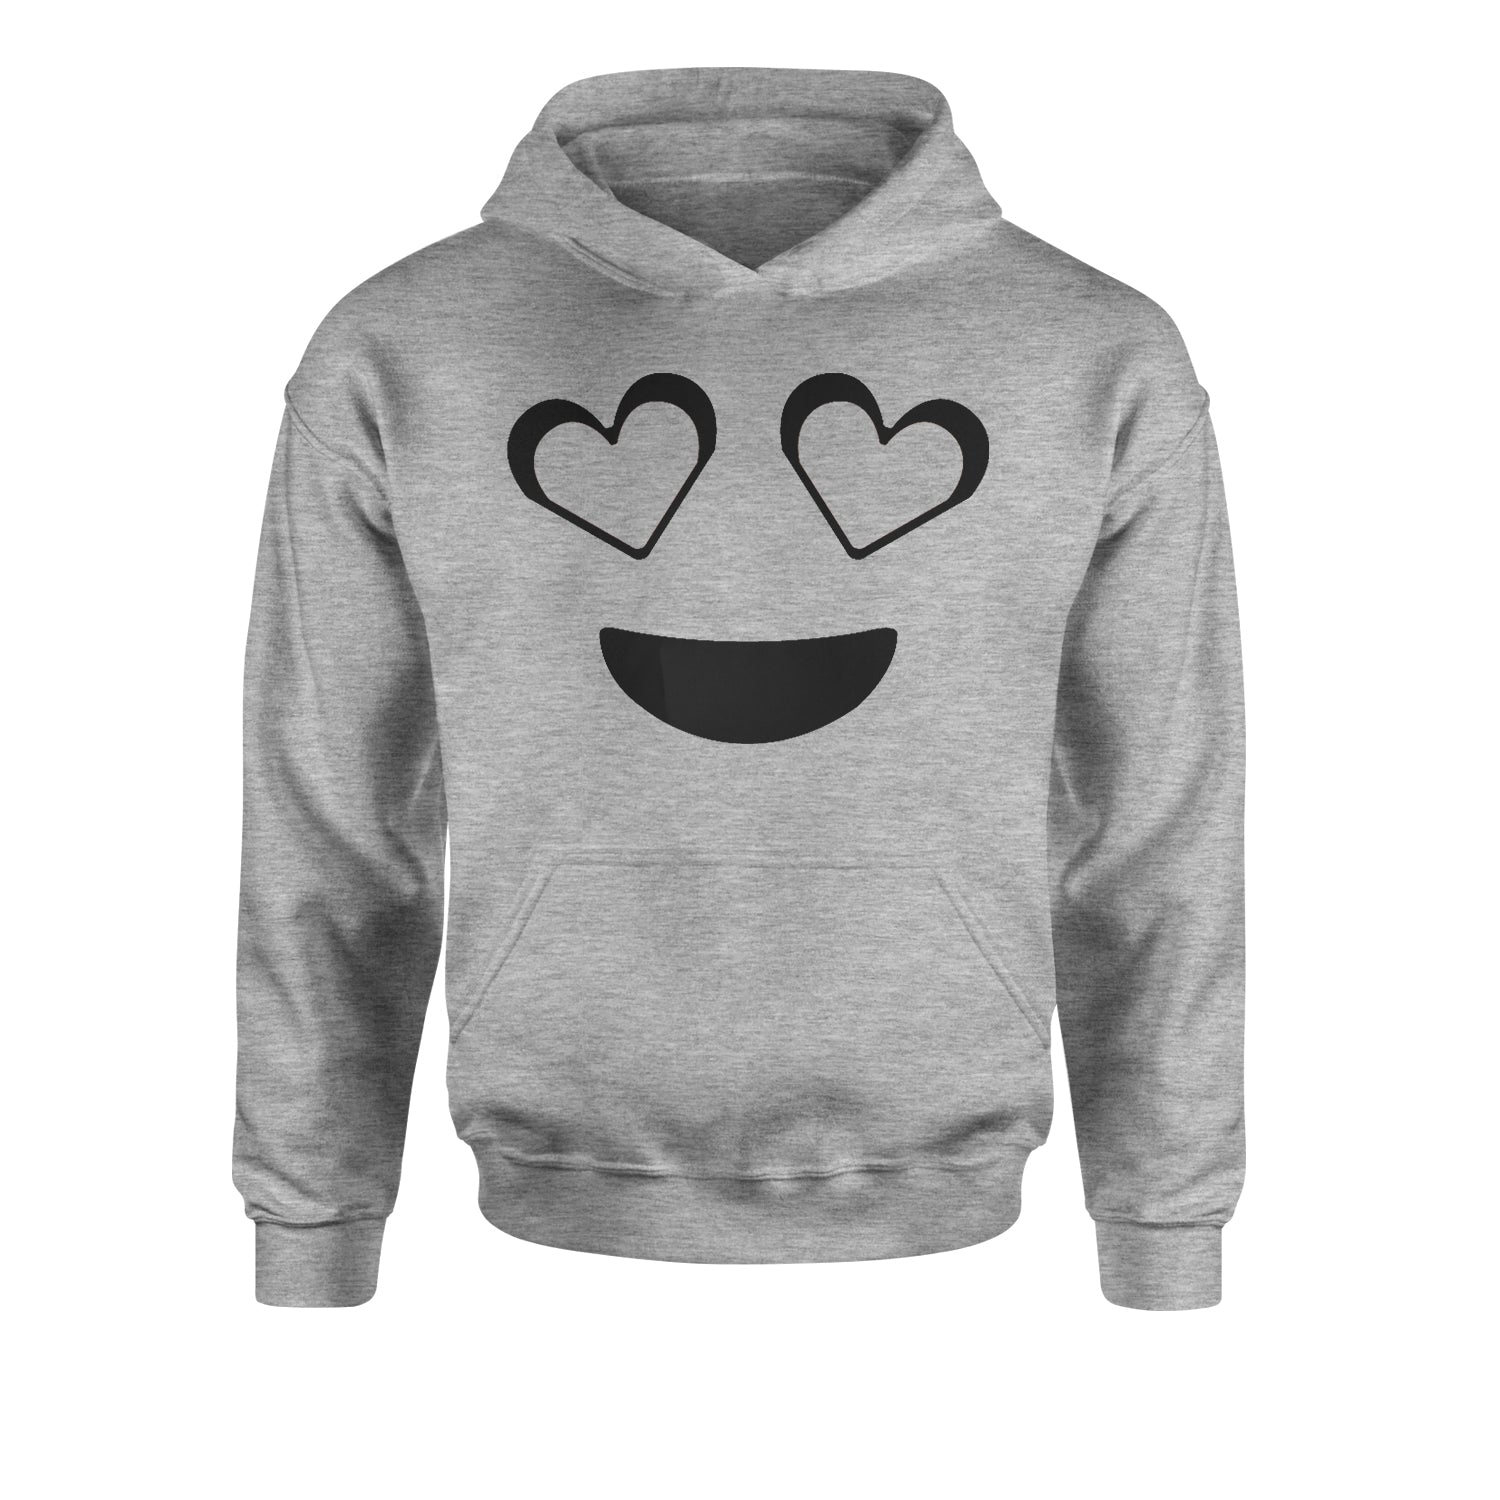 Emoticon Heart Eyes Smile Face Youth-Sized Hoodie cosplay, costume, dress, emoji, emote, face, halloween, Smile, up, yellow by Expression Tees